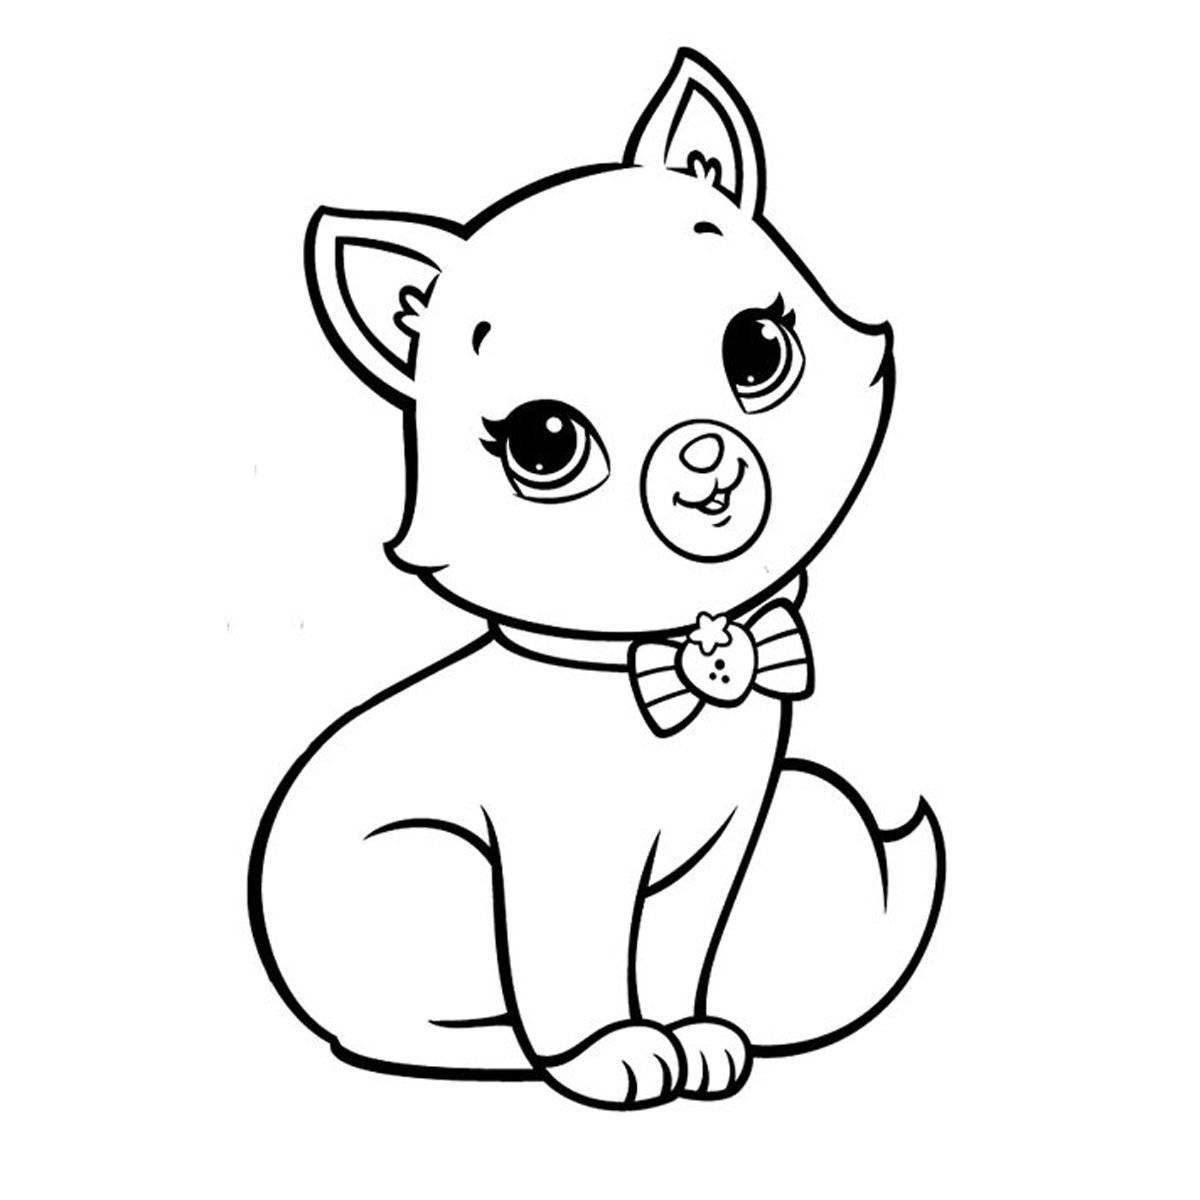 Cute coloring book for girls, cats and kittens